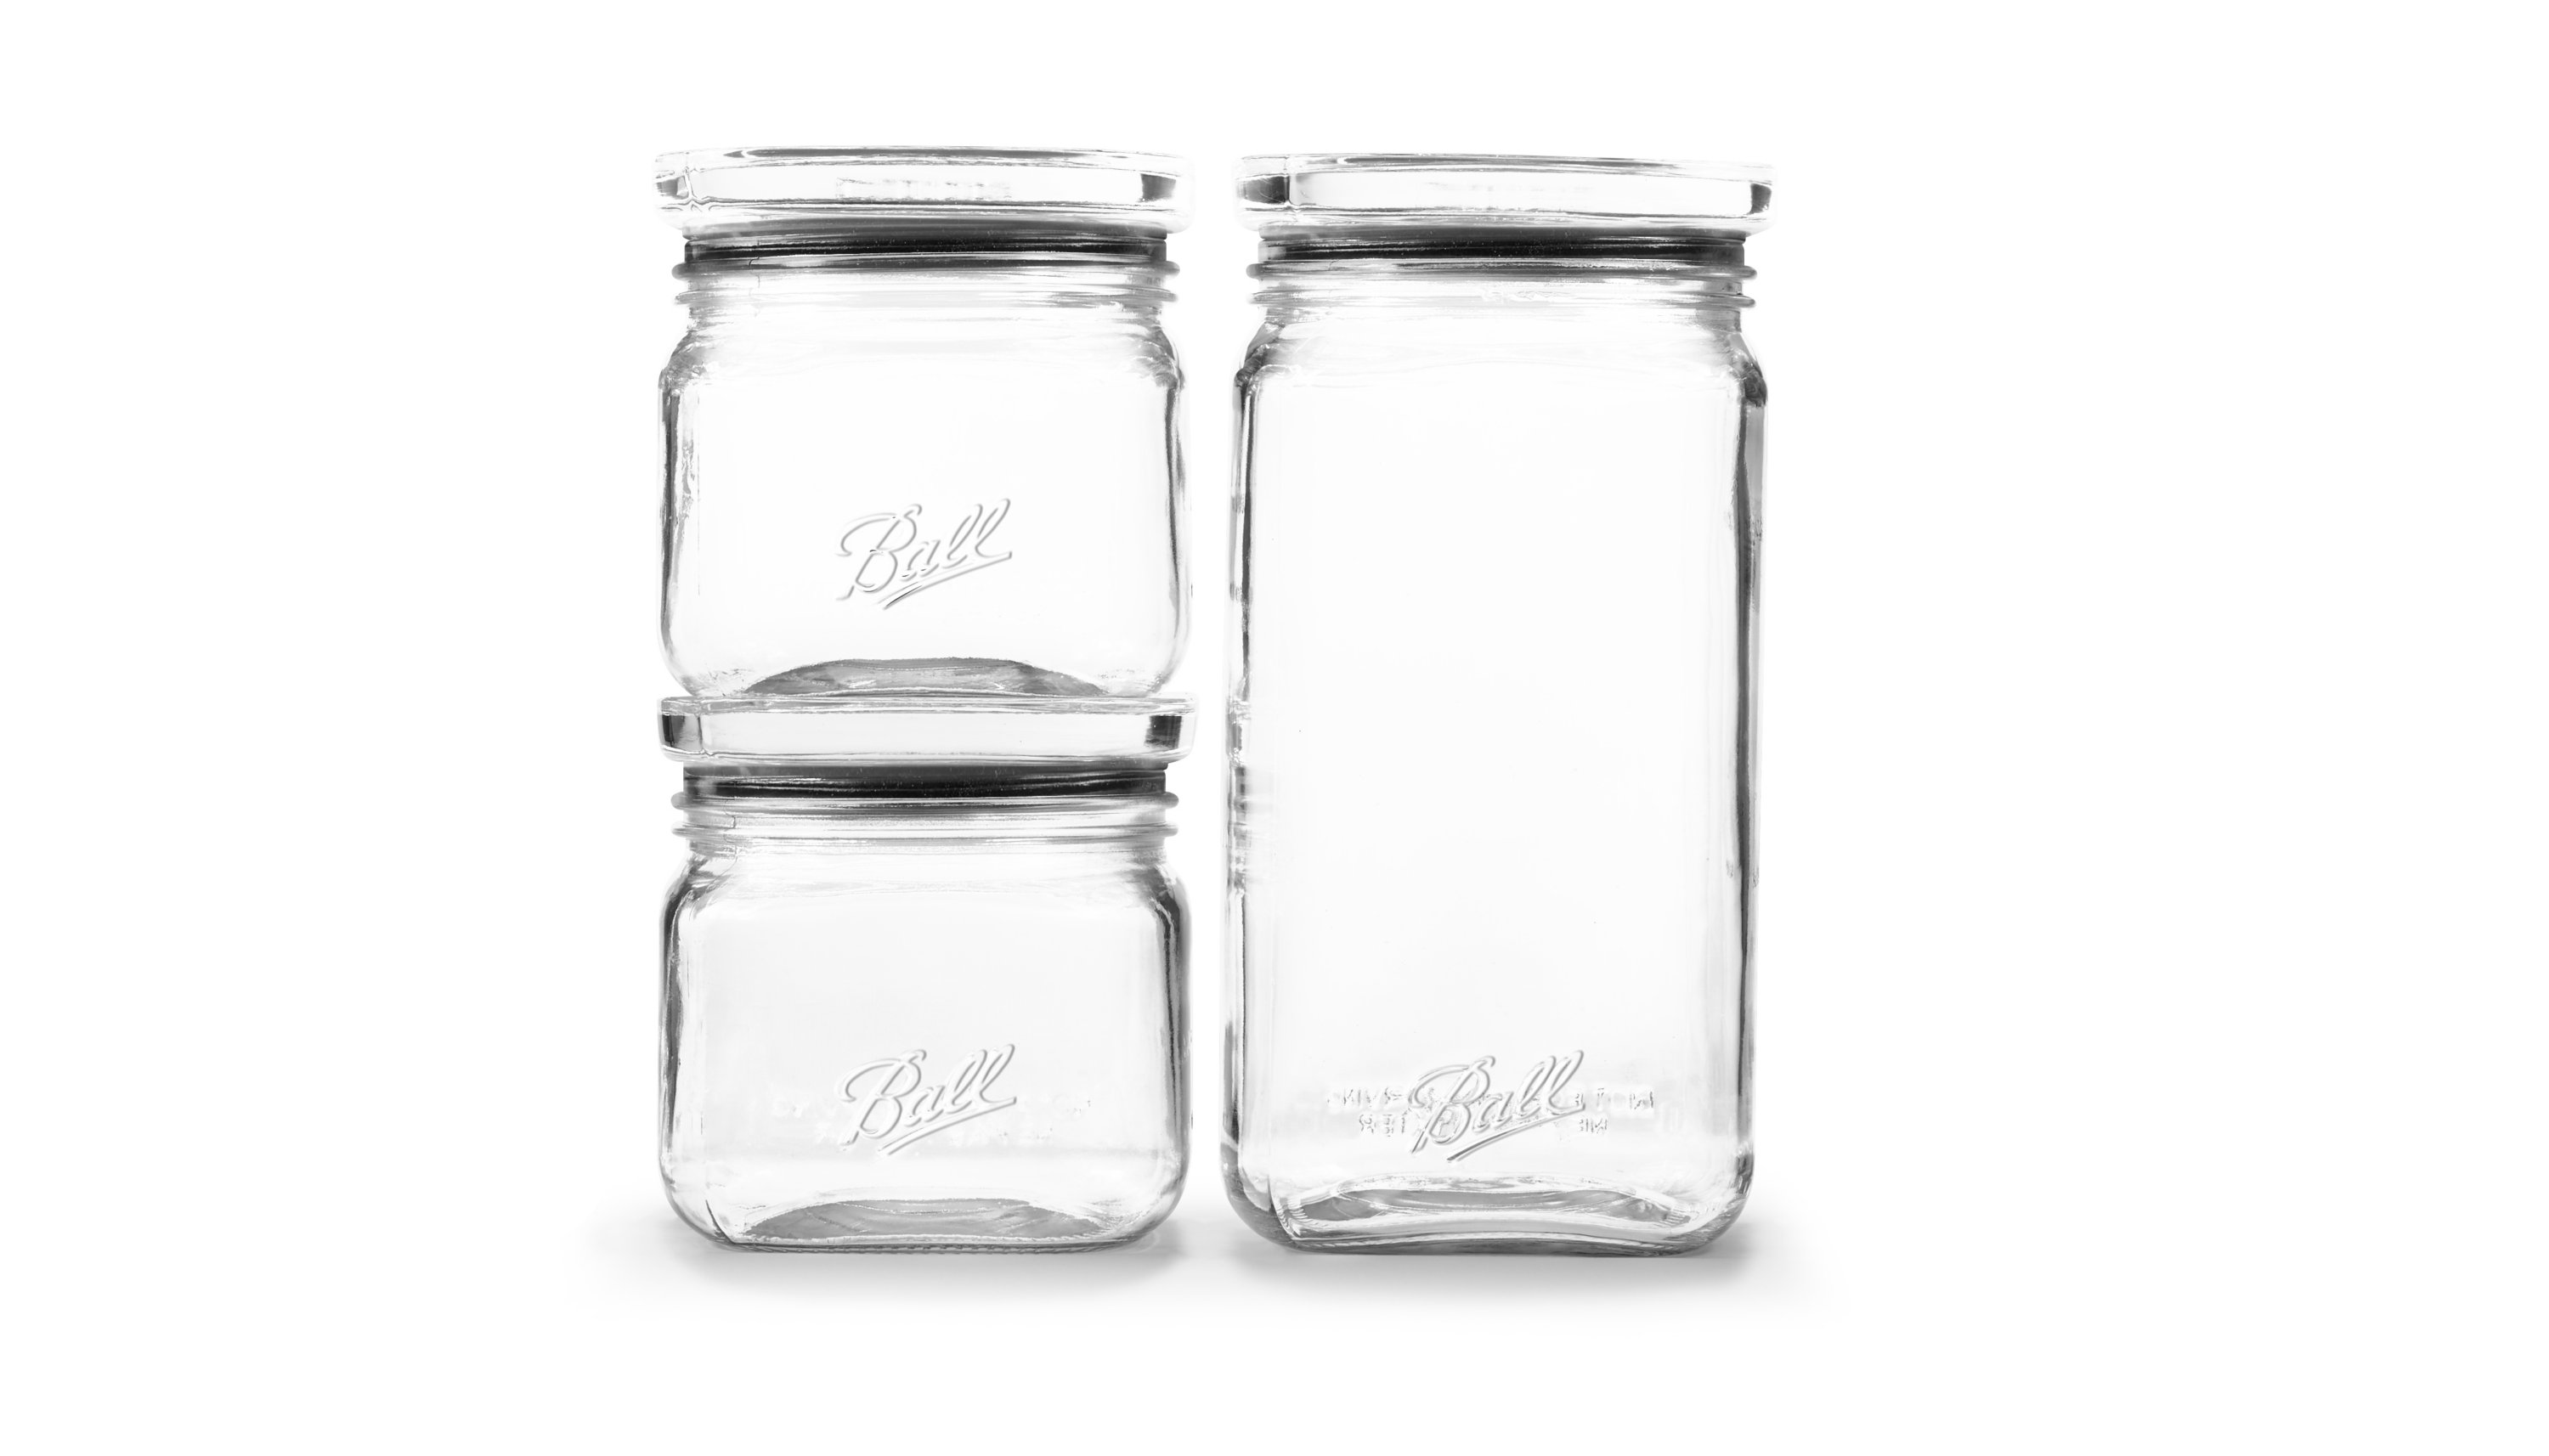 Ball 15.6 Cup Stack & Store Jar